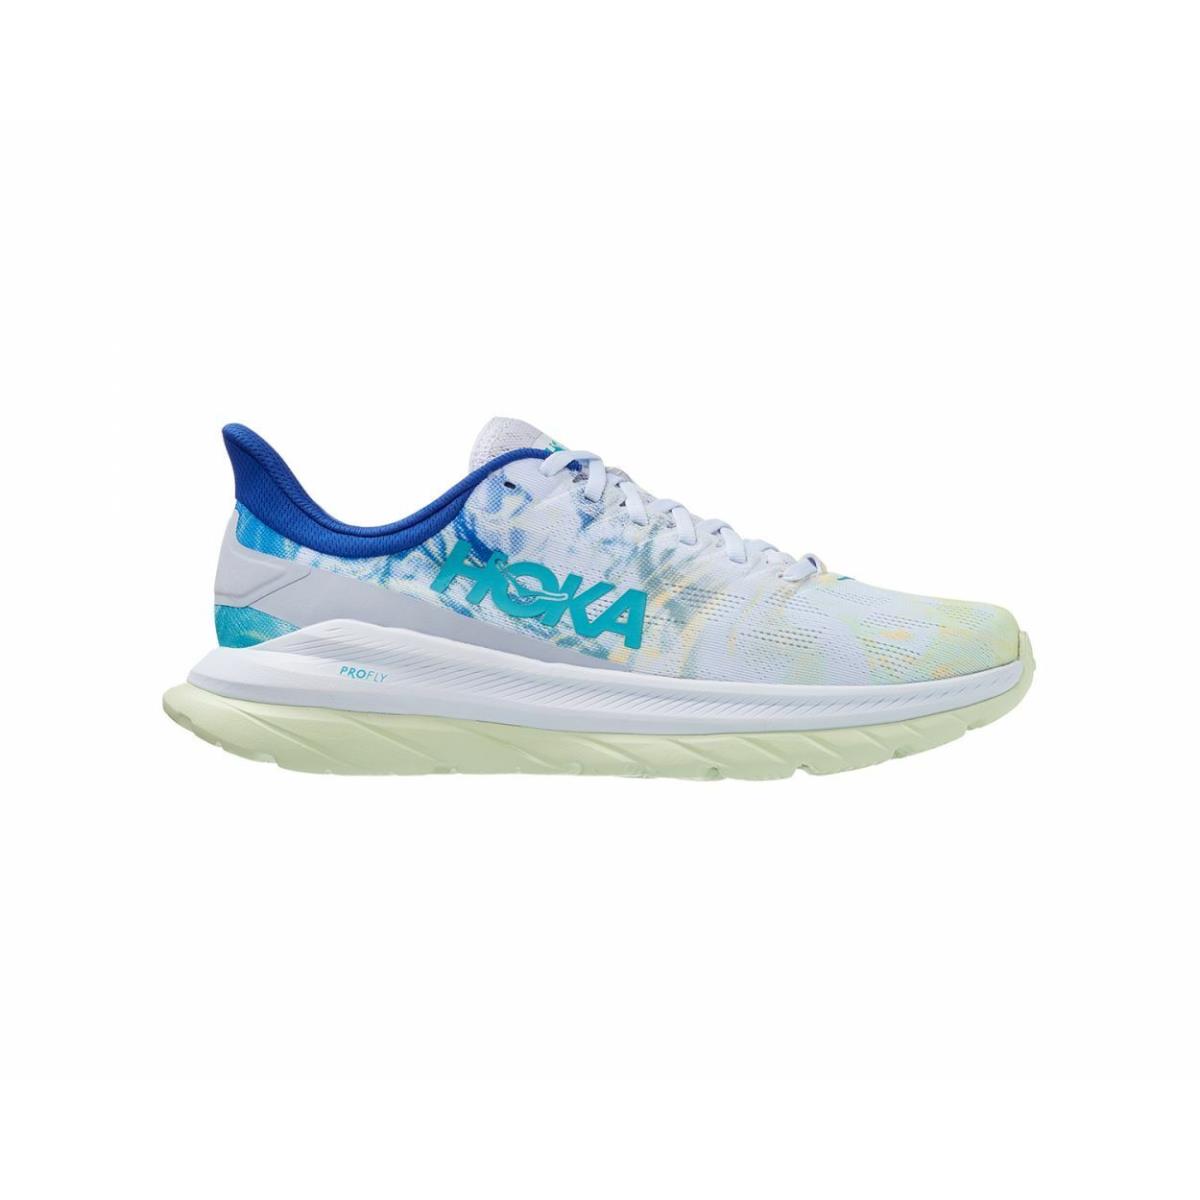 Men`s Hoka One One Mach 4 Together Pack Running Shoes - Multicolor